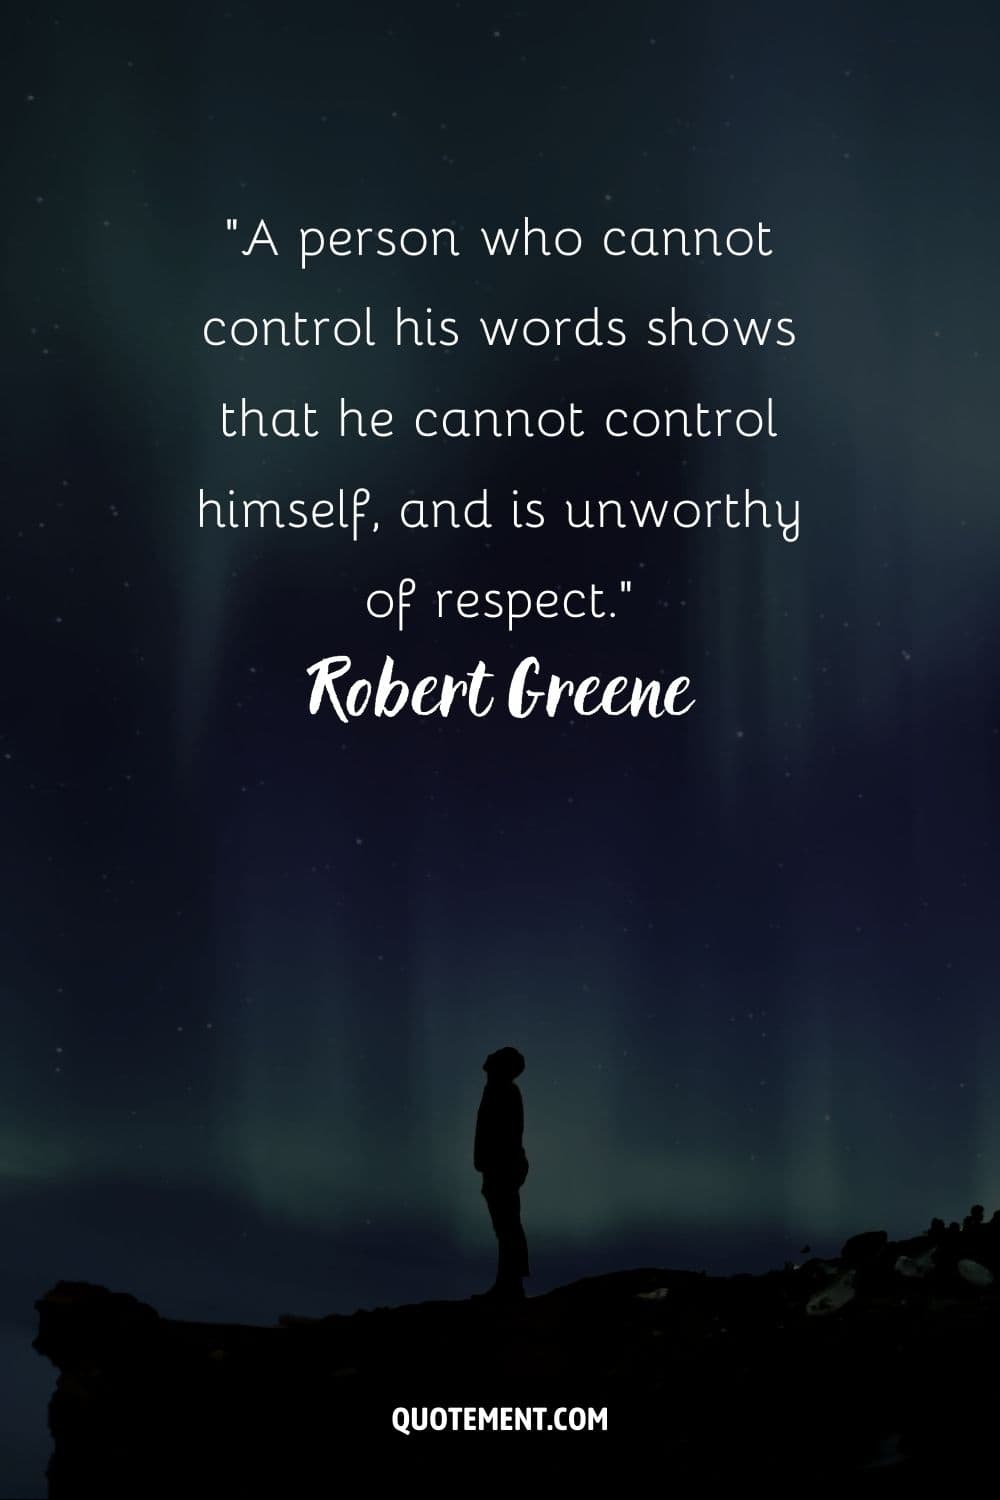 “A person who cannot control his words shows that he cannot control himself, and is unworthy of respect.” ― Robert Greene, The 48 Laws of Power